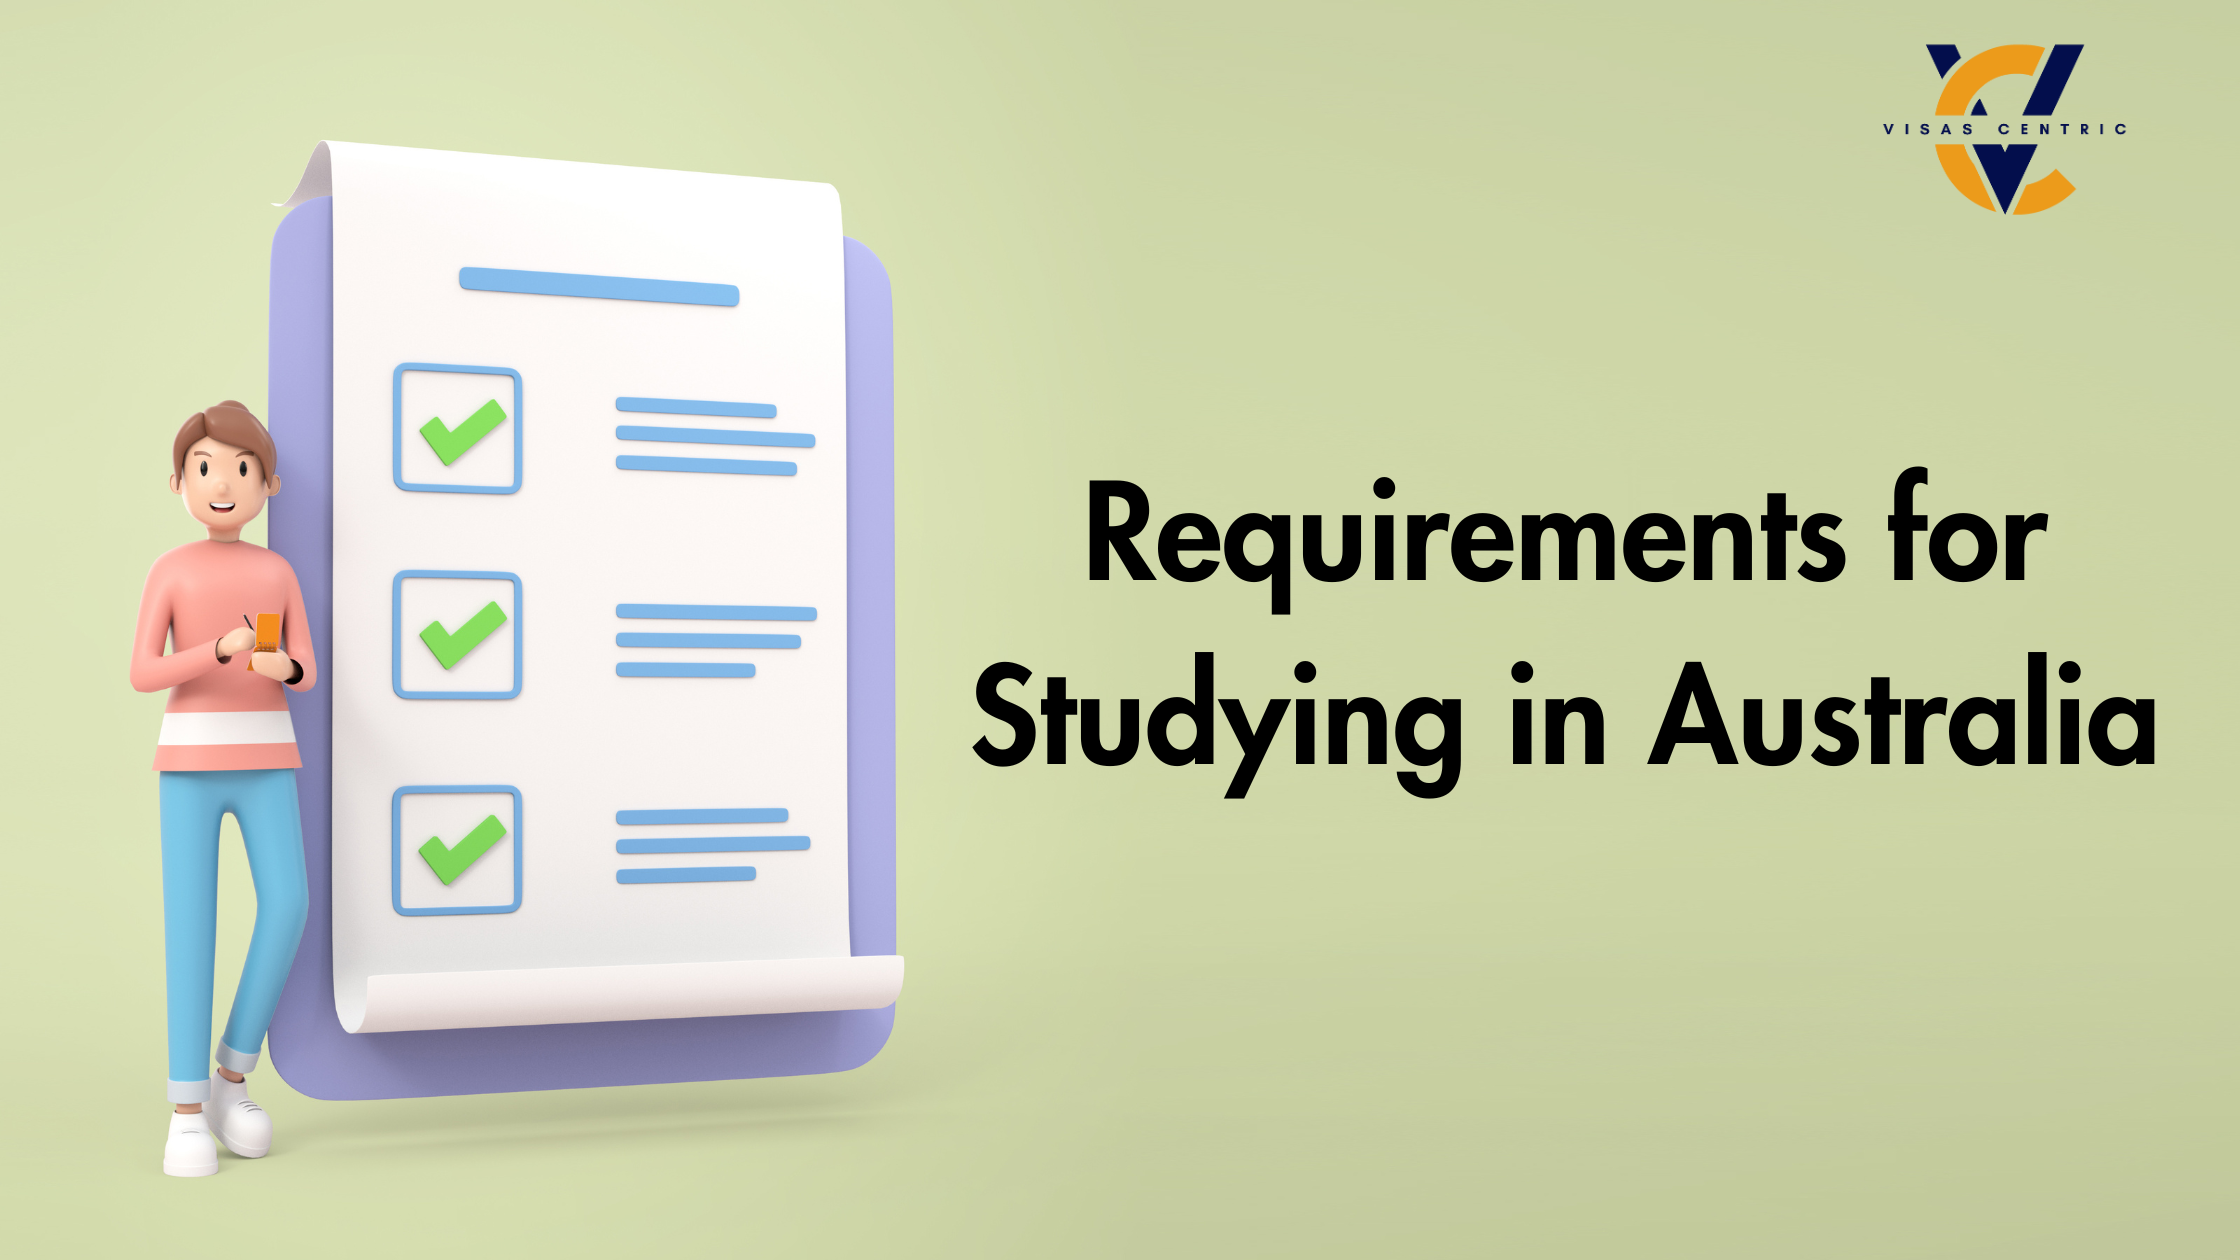 Requirements for Studying in Australia